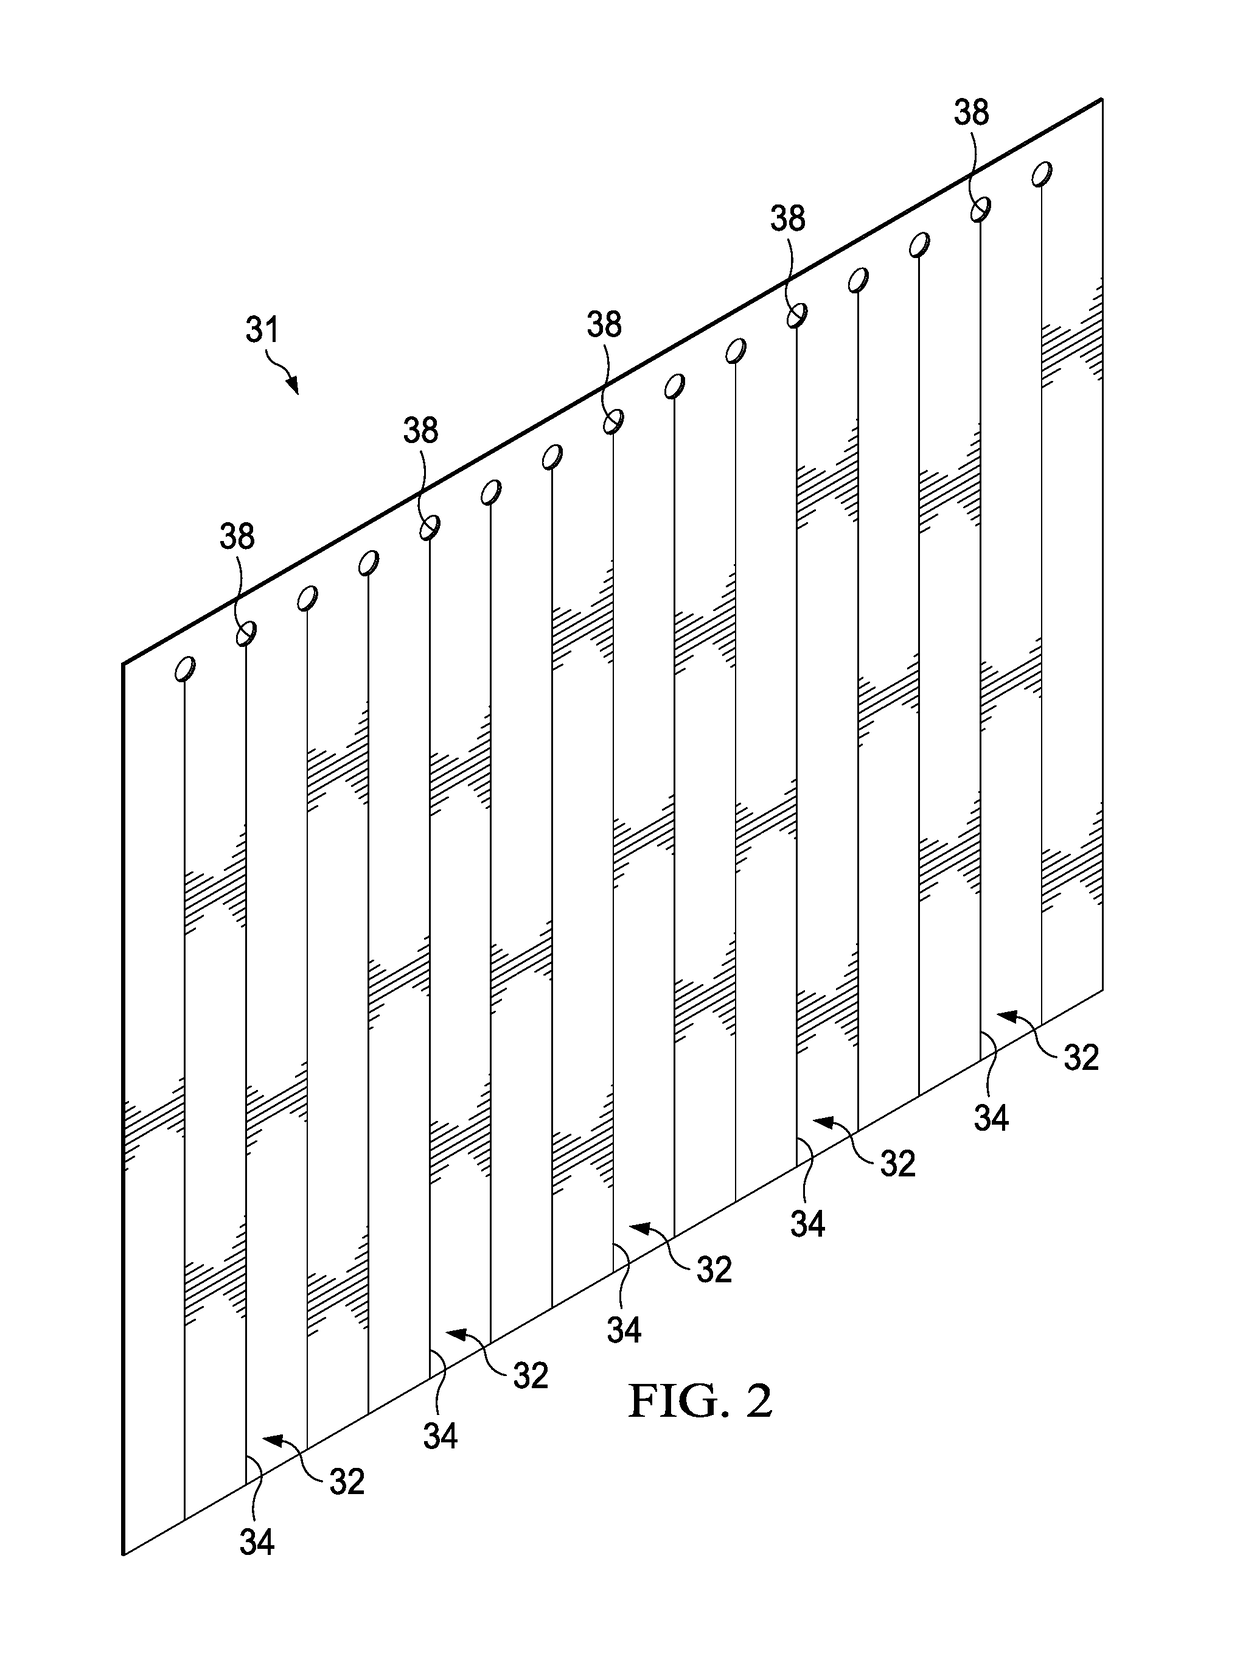 Shielding curtain assembly for an electromagnetic radiation scanning system